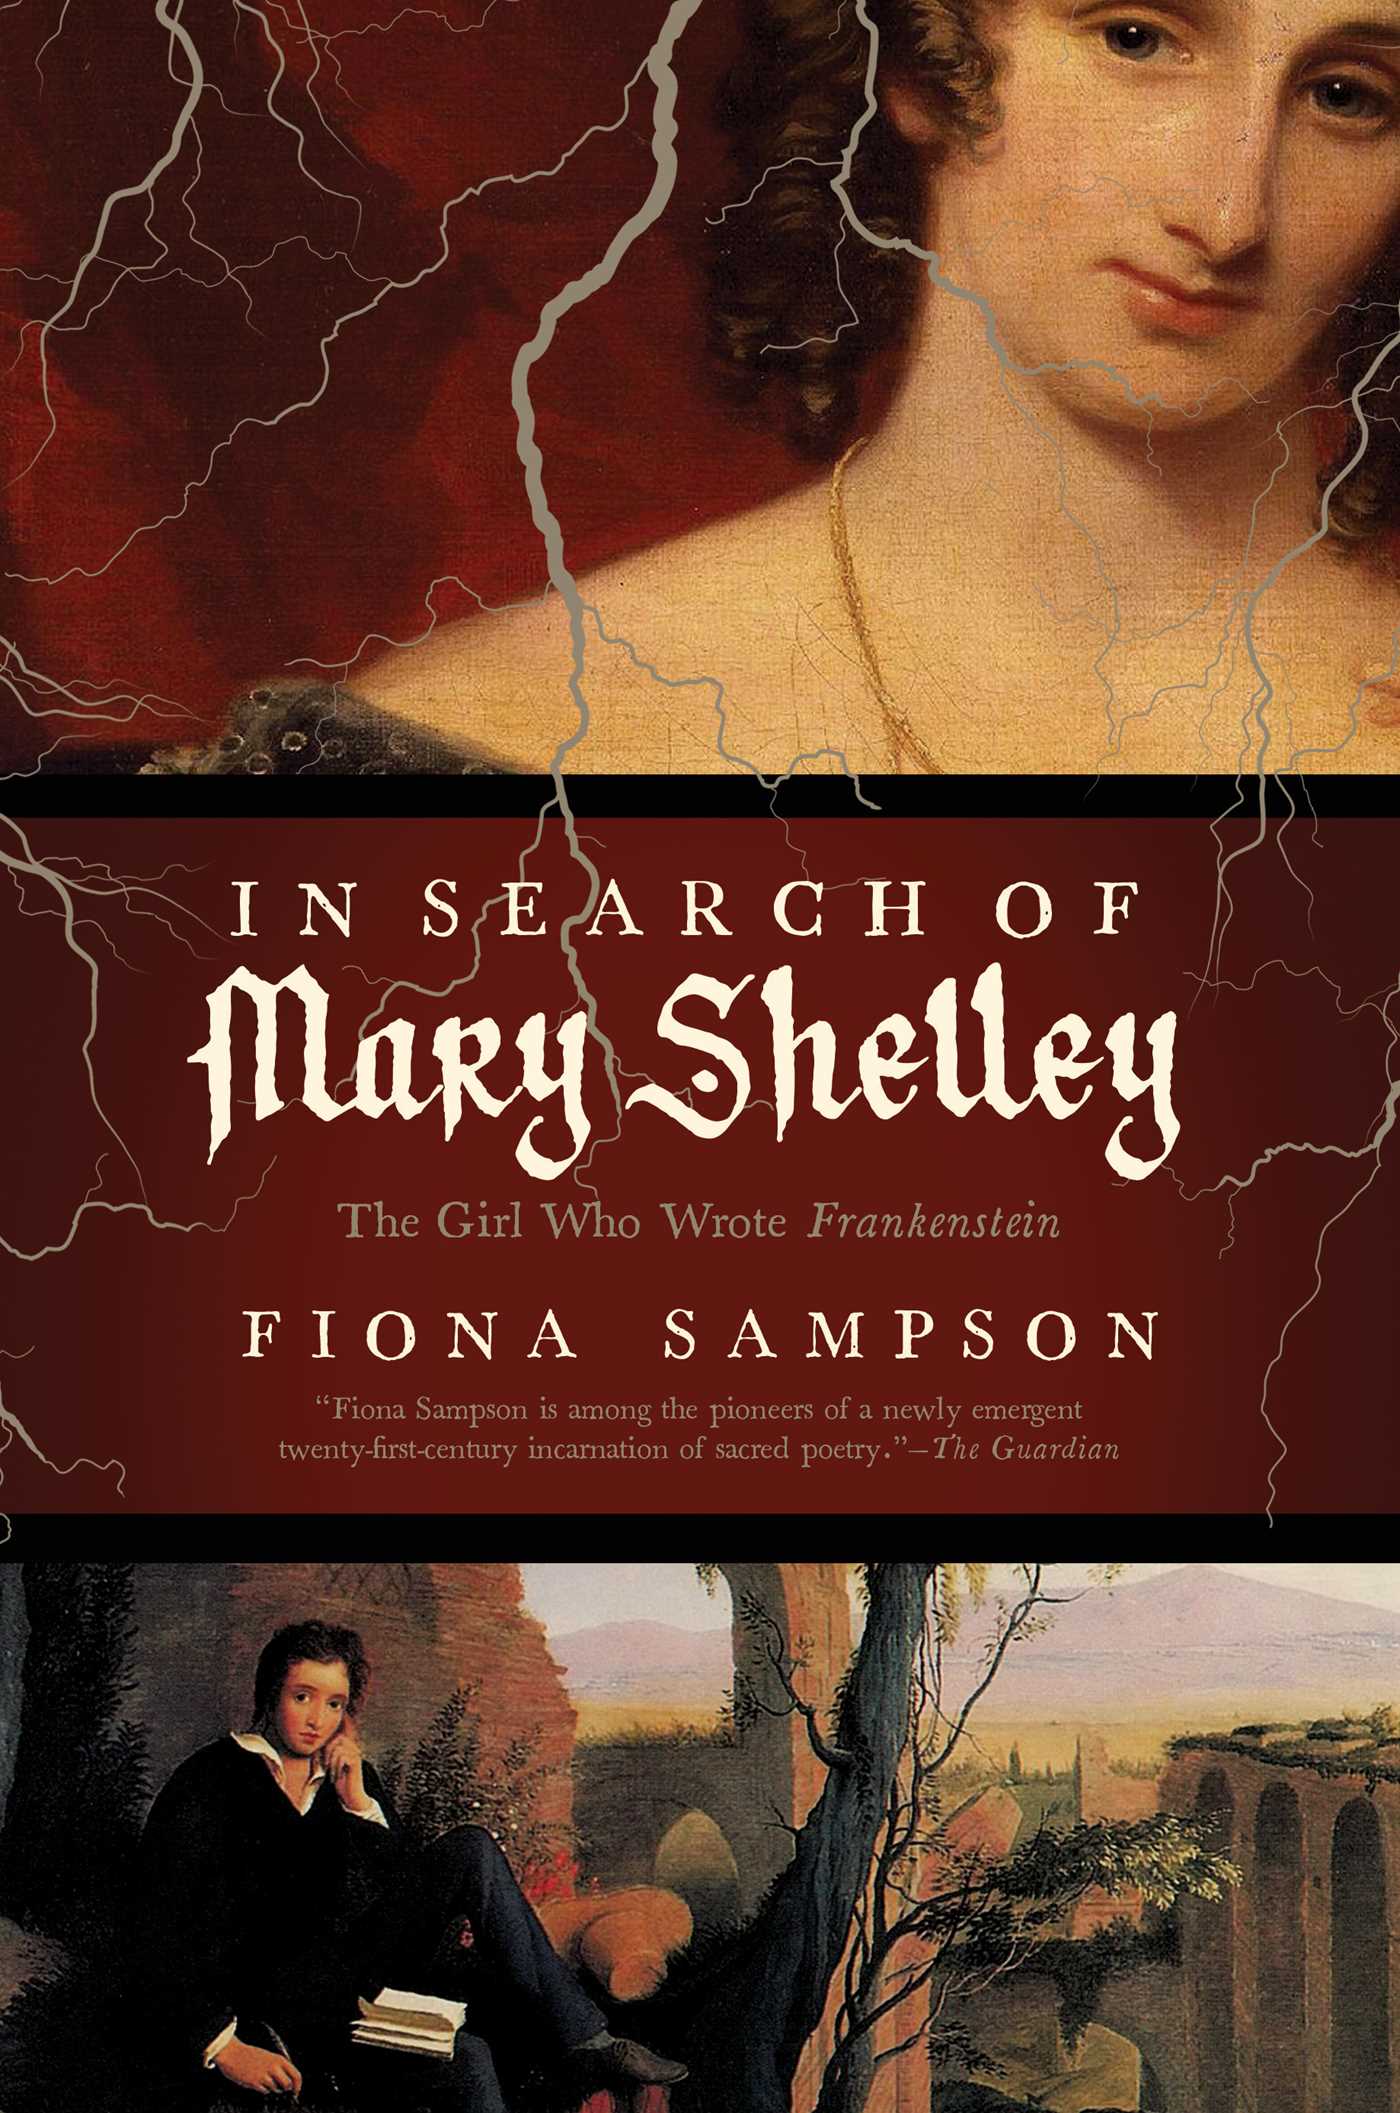 In Search Of Mary Shelley by Fiona Sampson